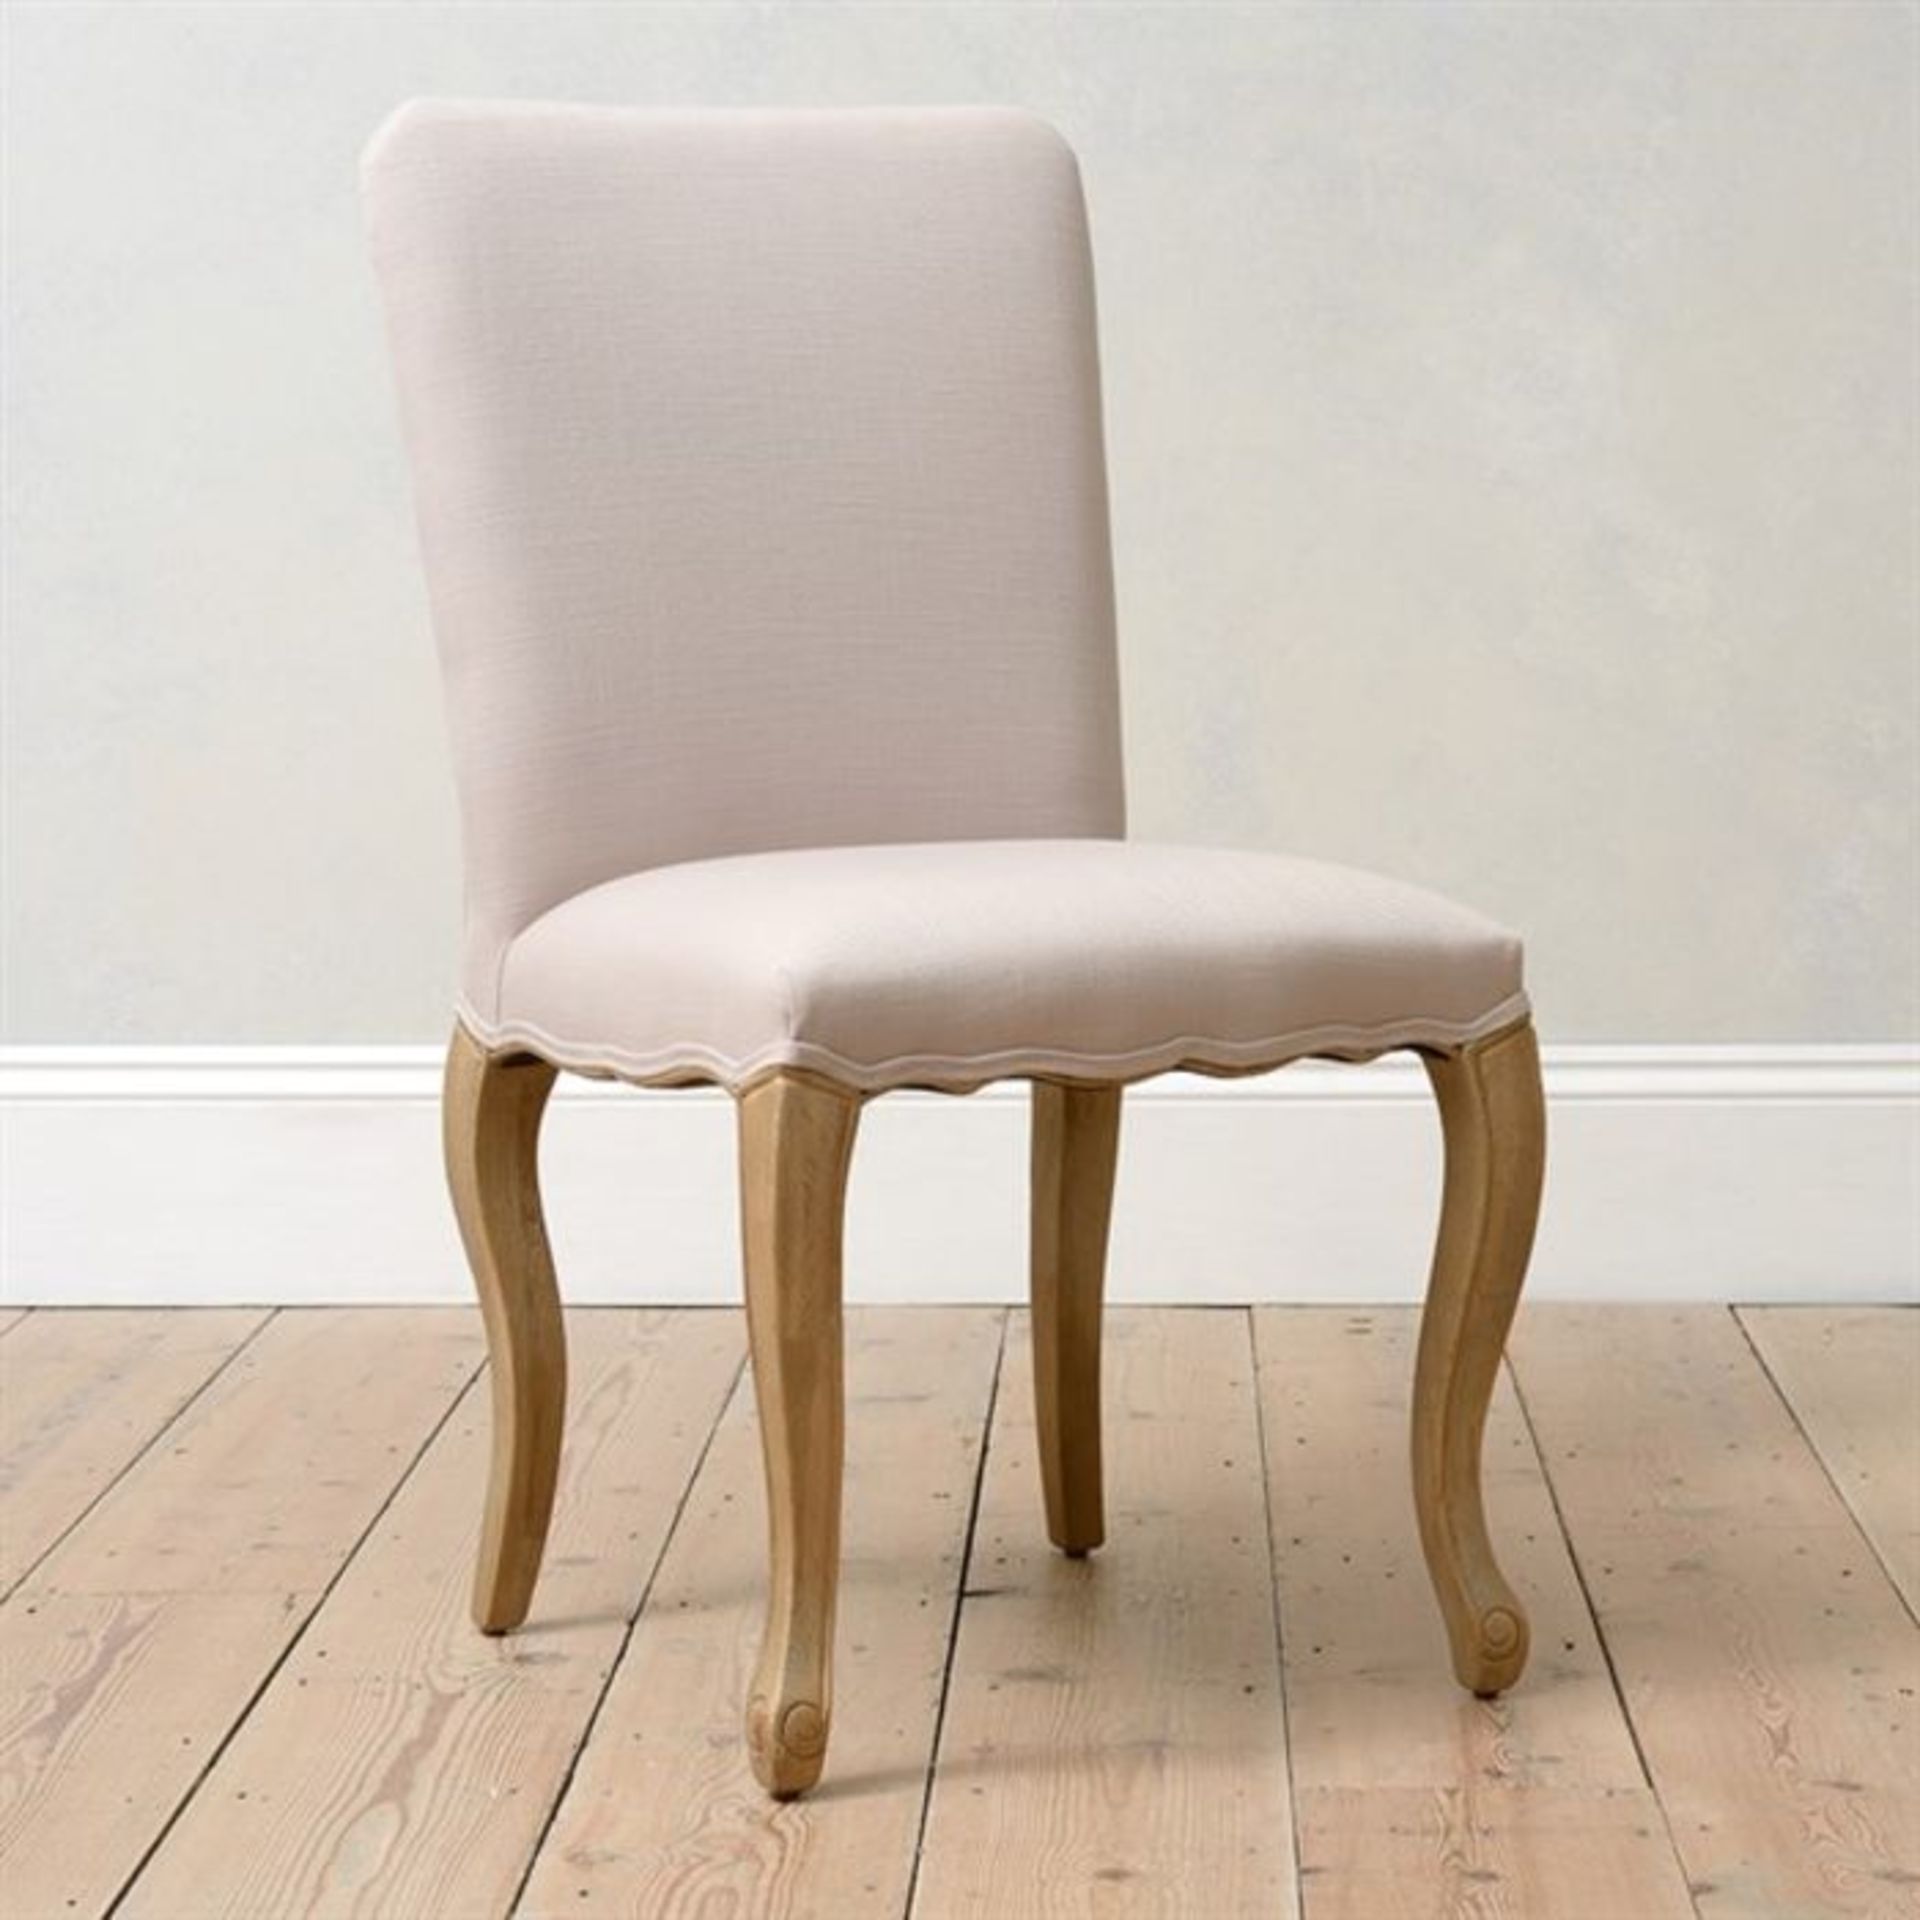 Cotswold Company Camille Limewash Oak Stone Linen Dining Chair RRP 275.00